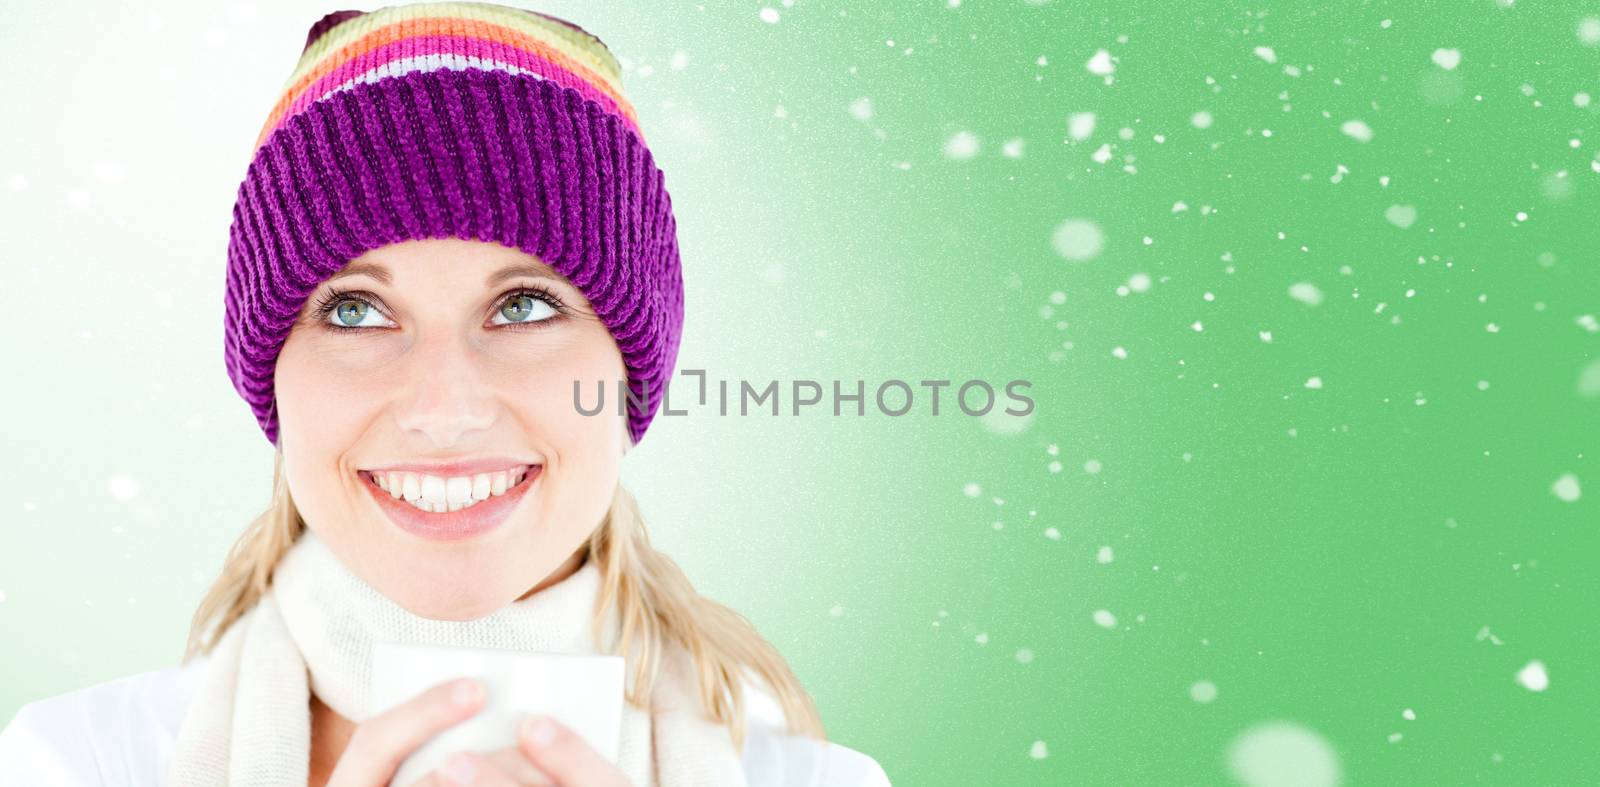 Smiling woman with a colorful hat and a cup in her hands against snow